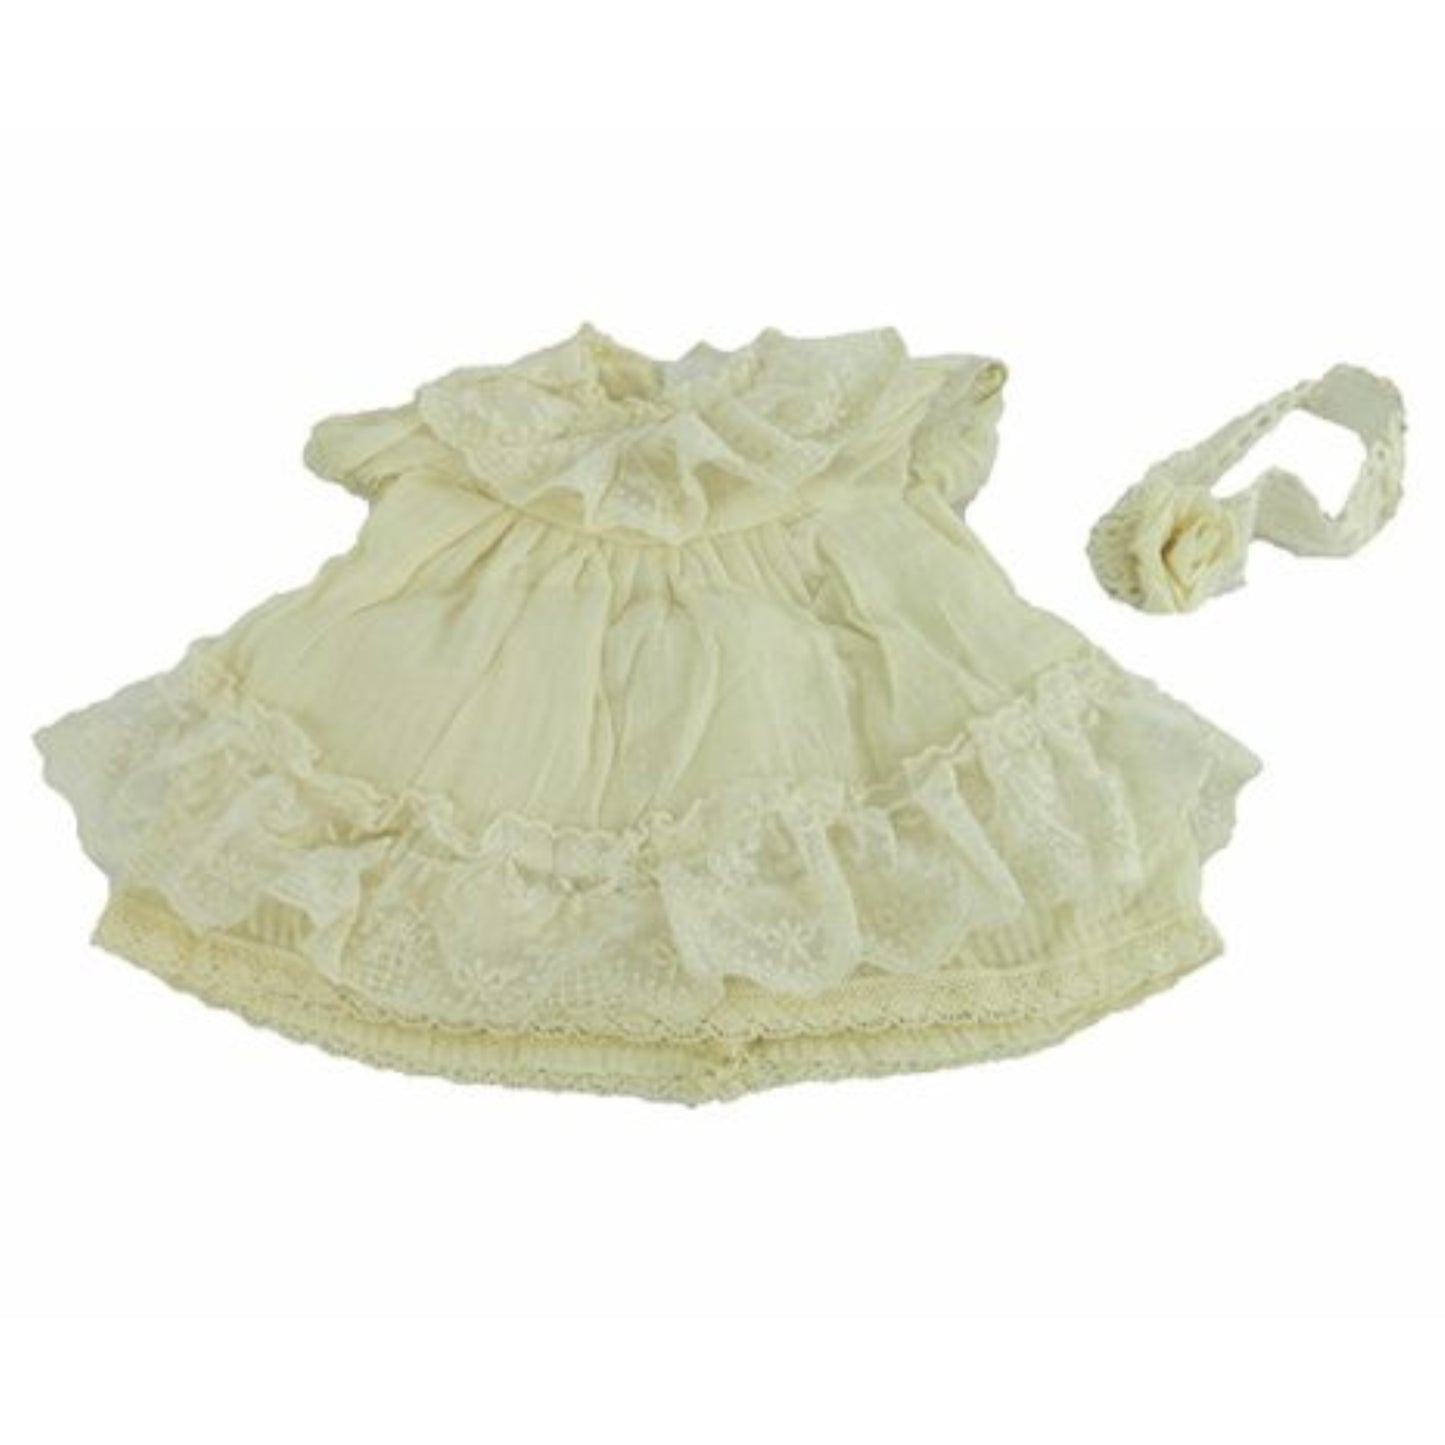 Cream Lace Dress with Headband for 18-inch dolls